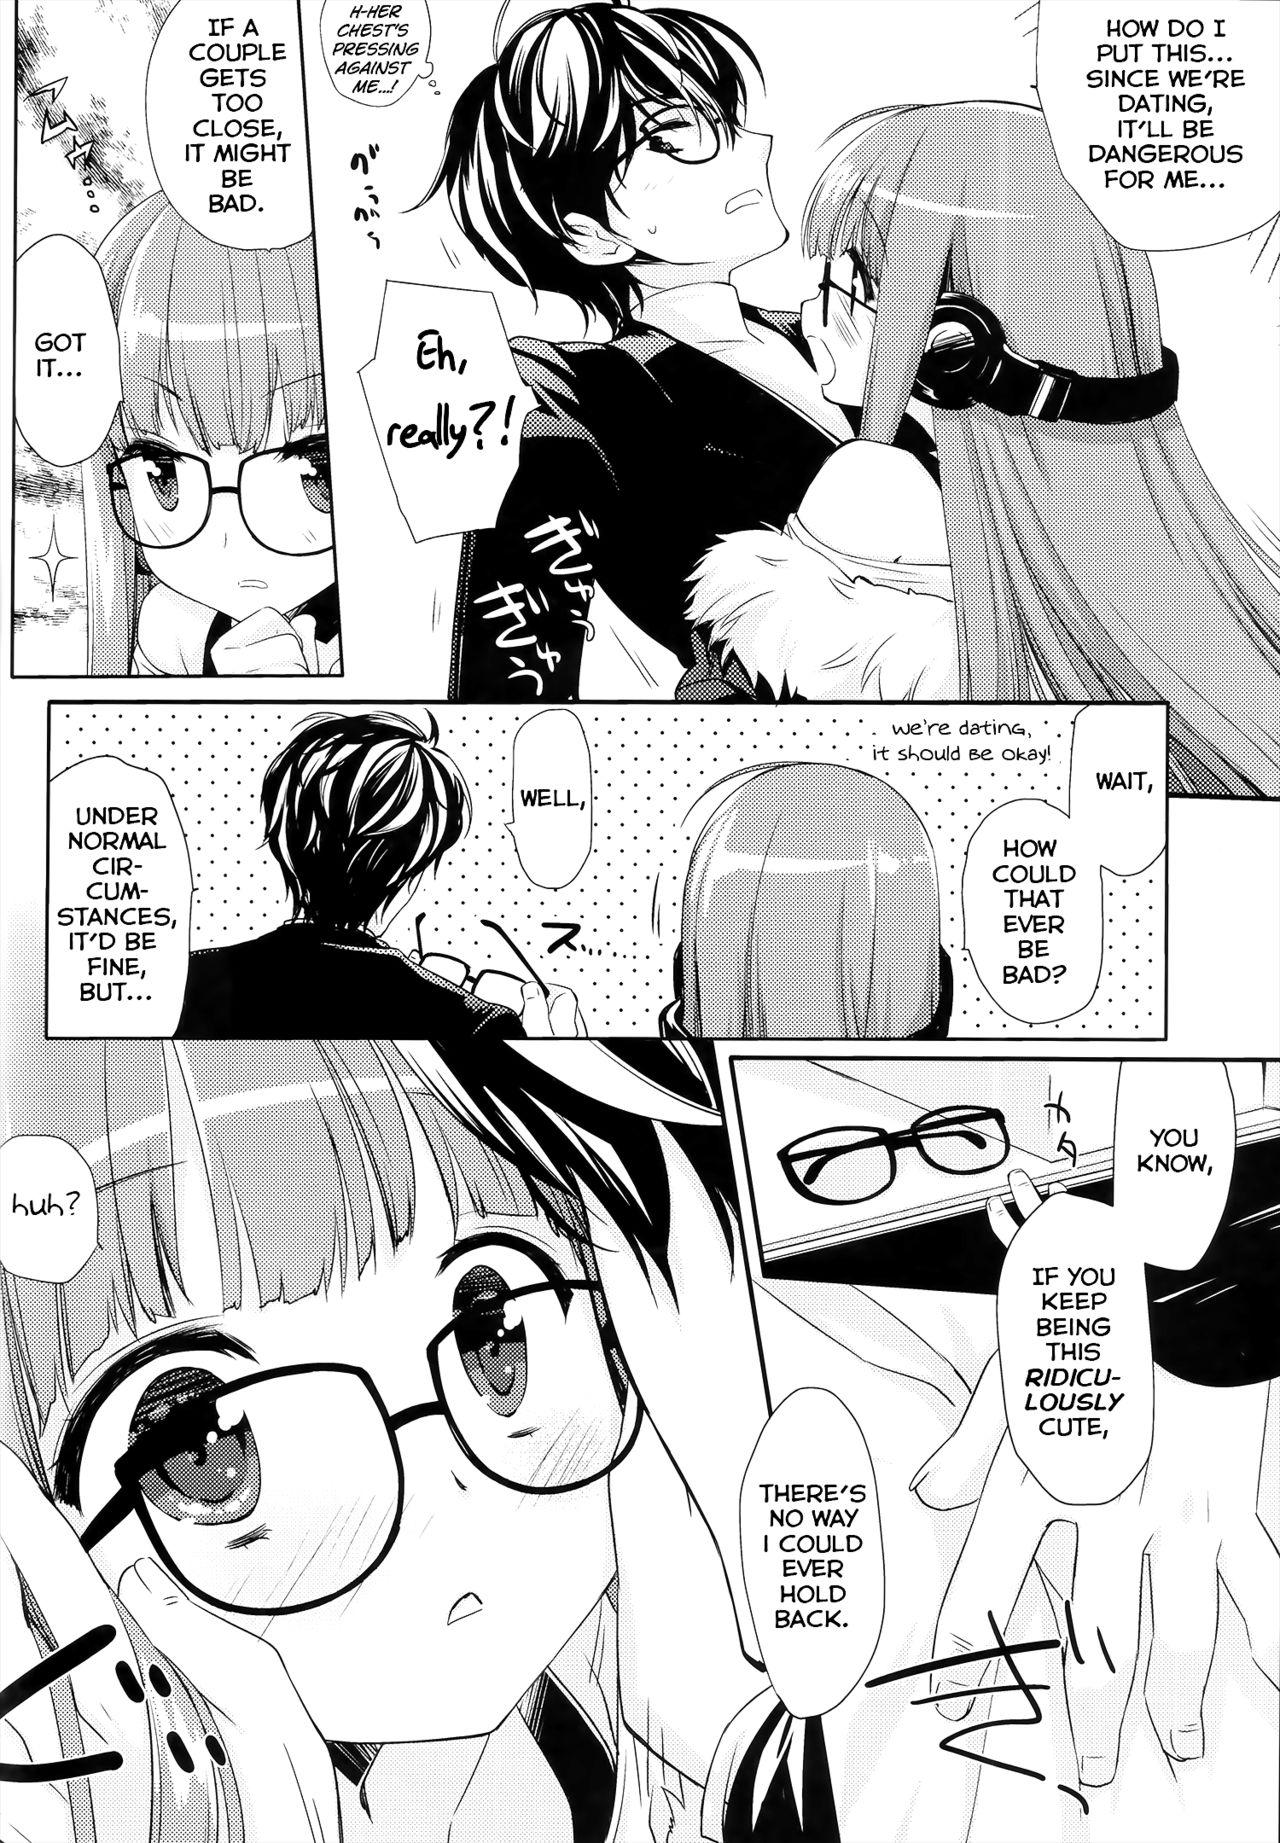 Gaping FUTABA REVIVE - Persona 5 Tiny Tits - Page 9